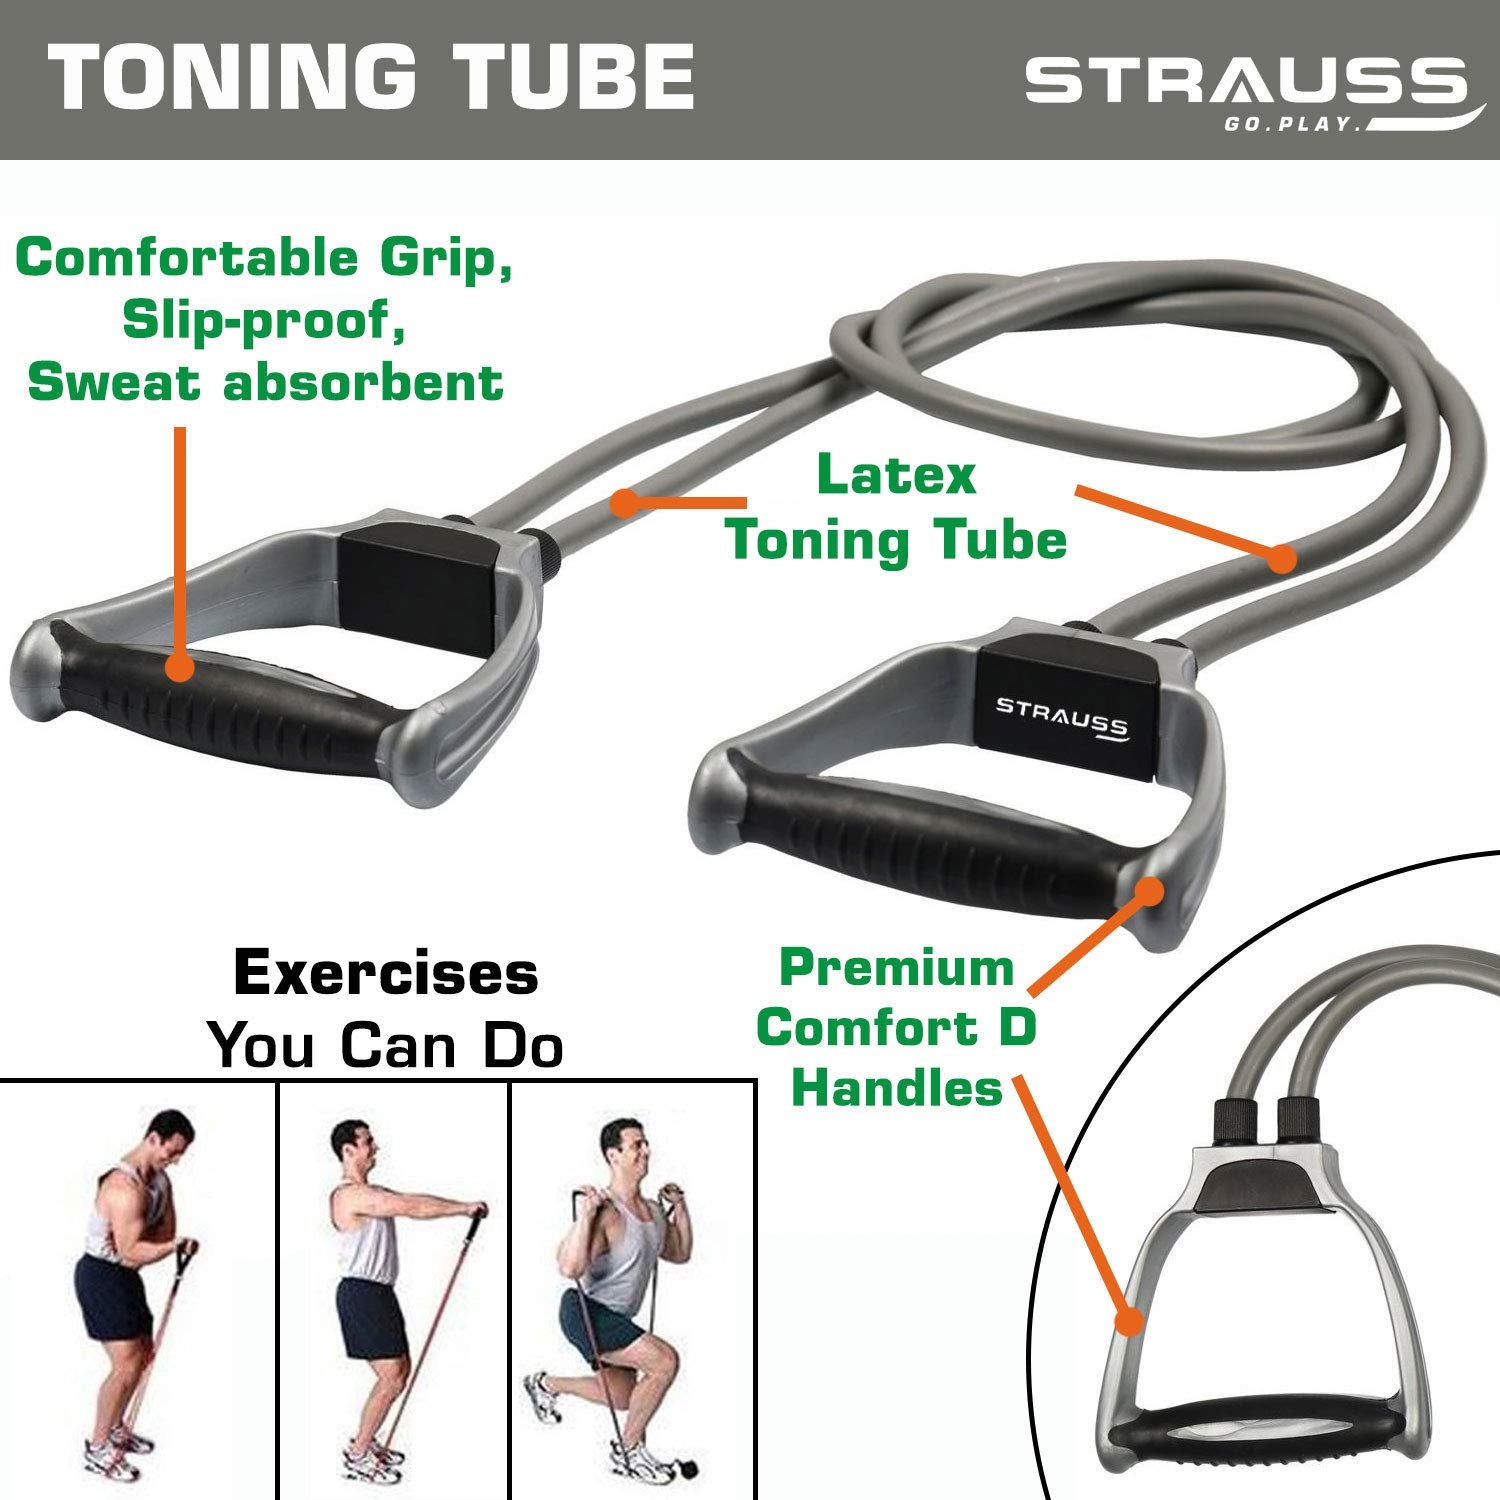 Strauss Double Toning Tube, (Grey) With Hand Grip And Skipping Rope